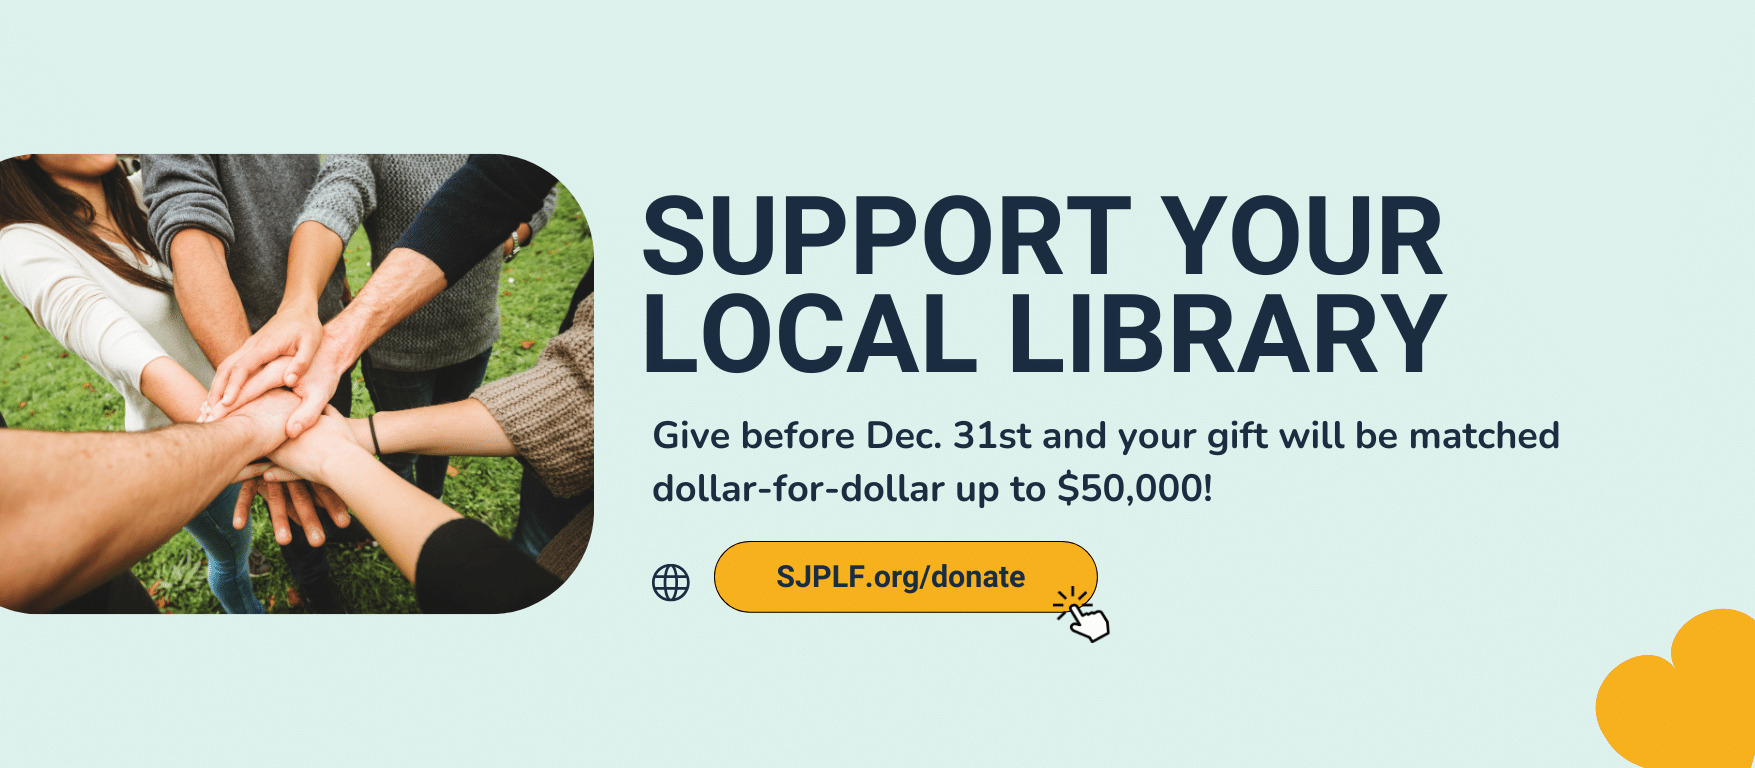 A photo of hands coming together. Large text states "Support your local library. small text states "give before dec 31st and your gift will be matched dollar-for-dollar up to $50,000!" there is a button to click that takes you to SJPLF's donate page. 